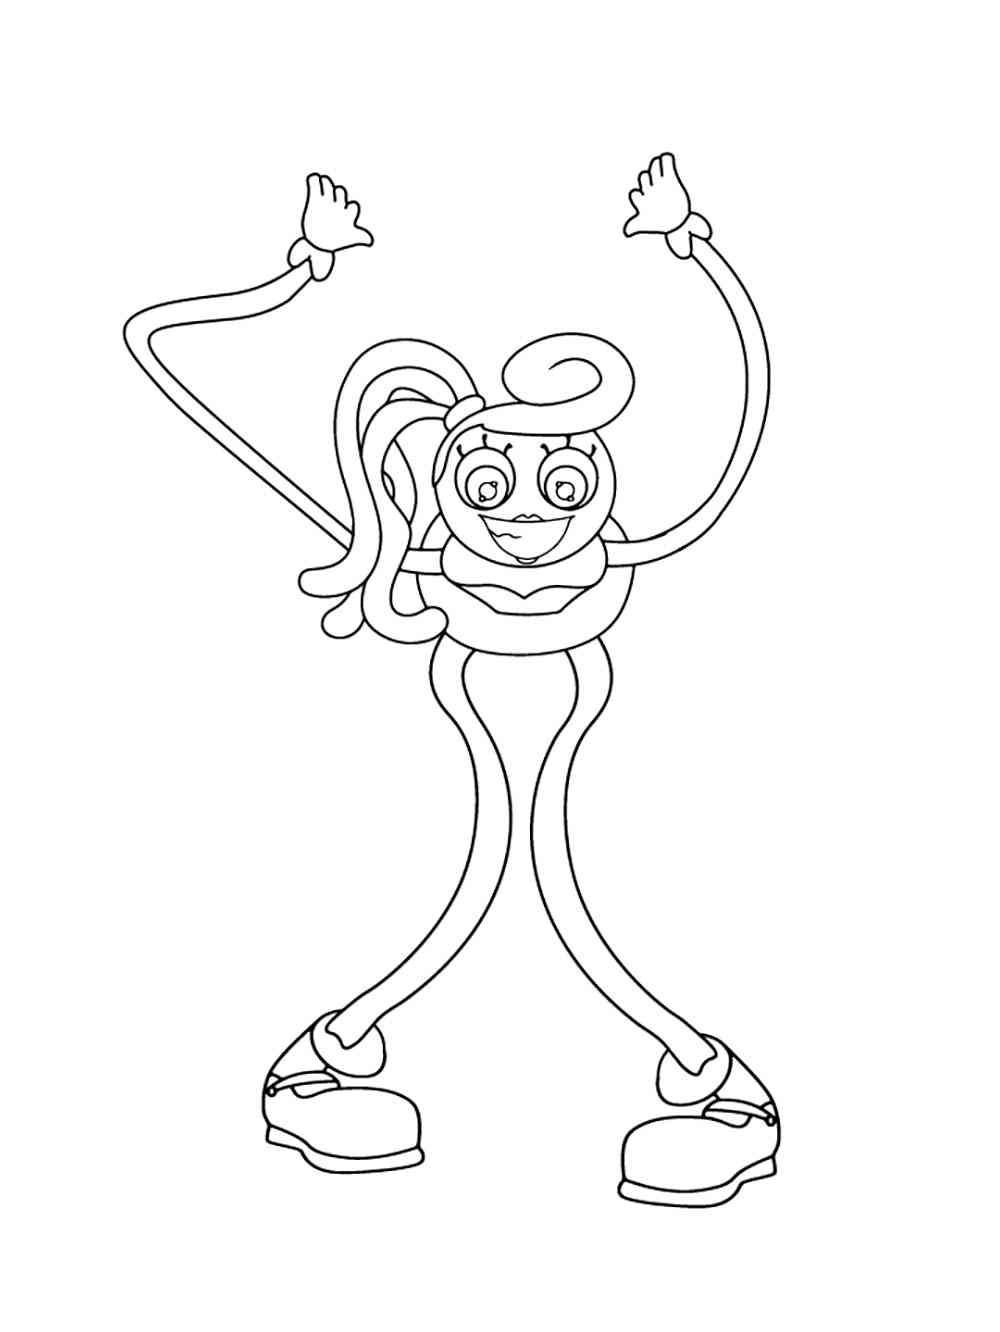 Download or print this amazing coloring page: Mommy Long Legs